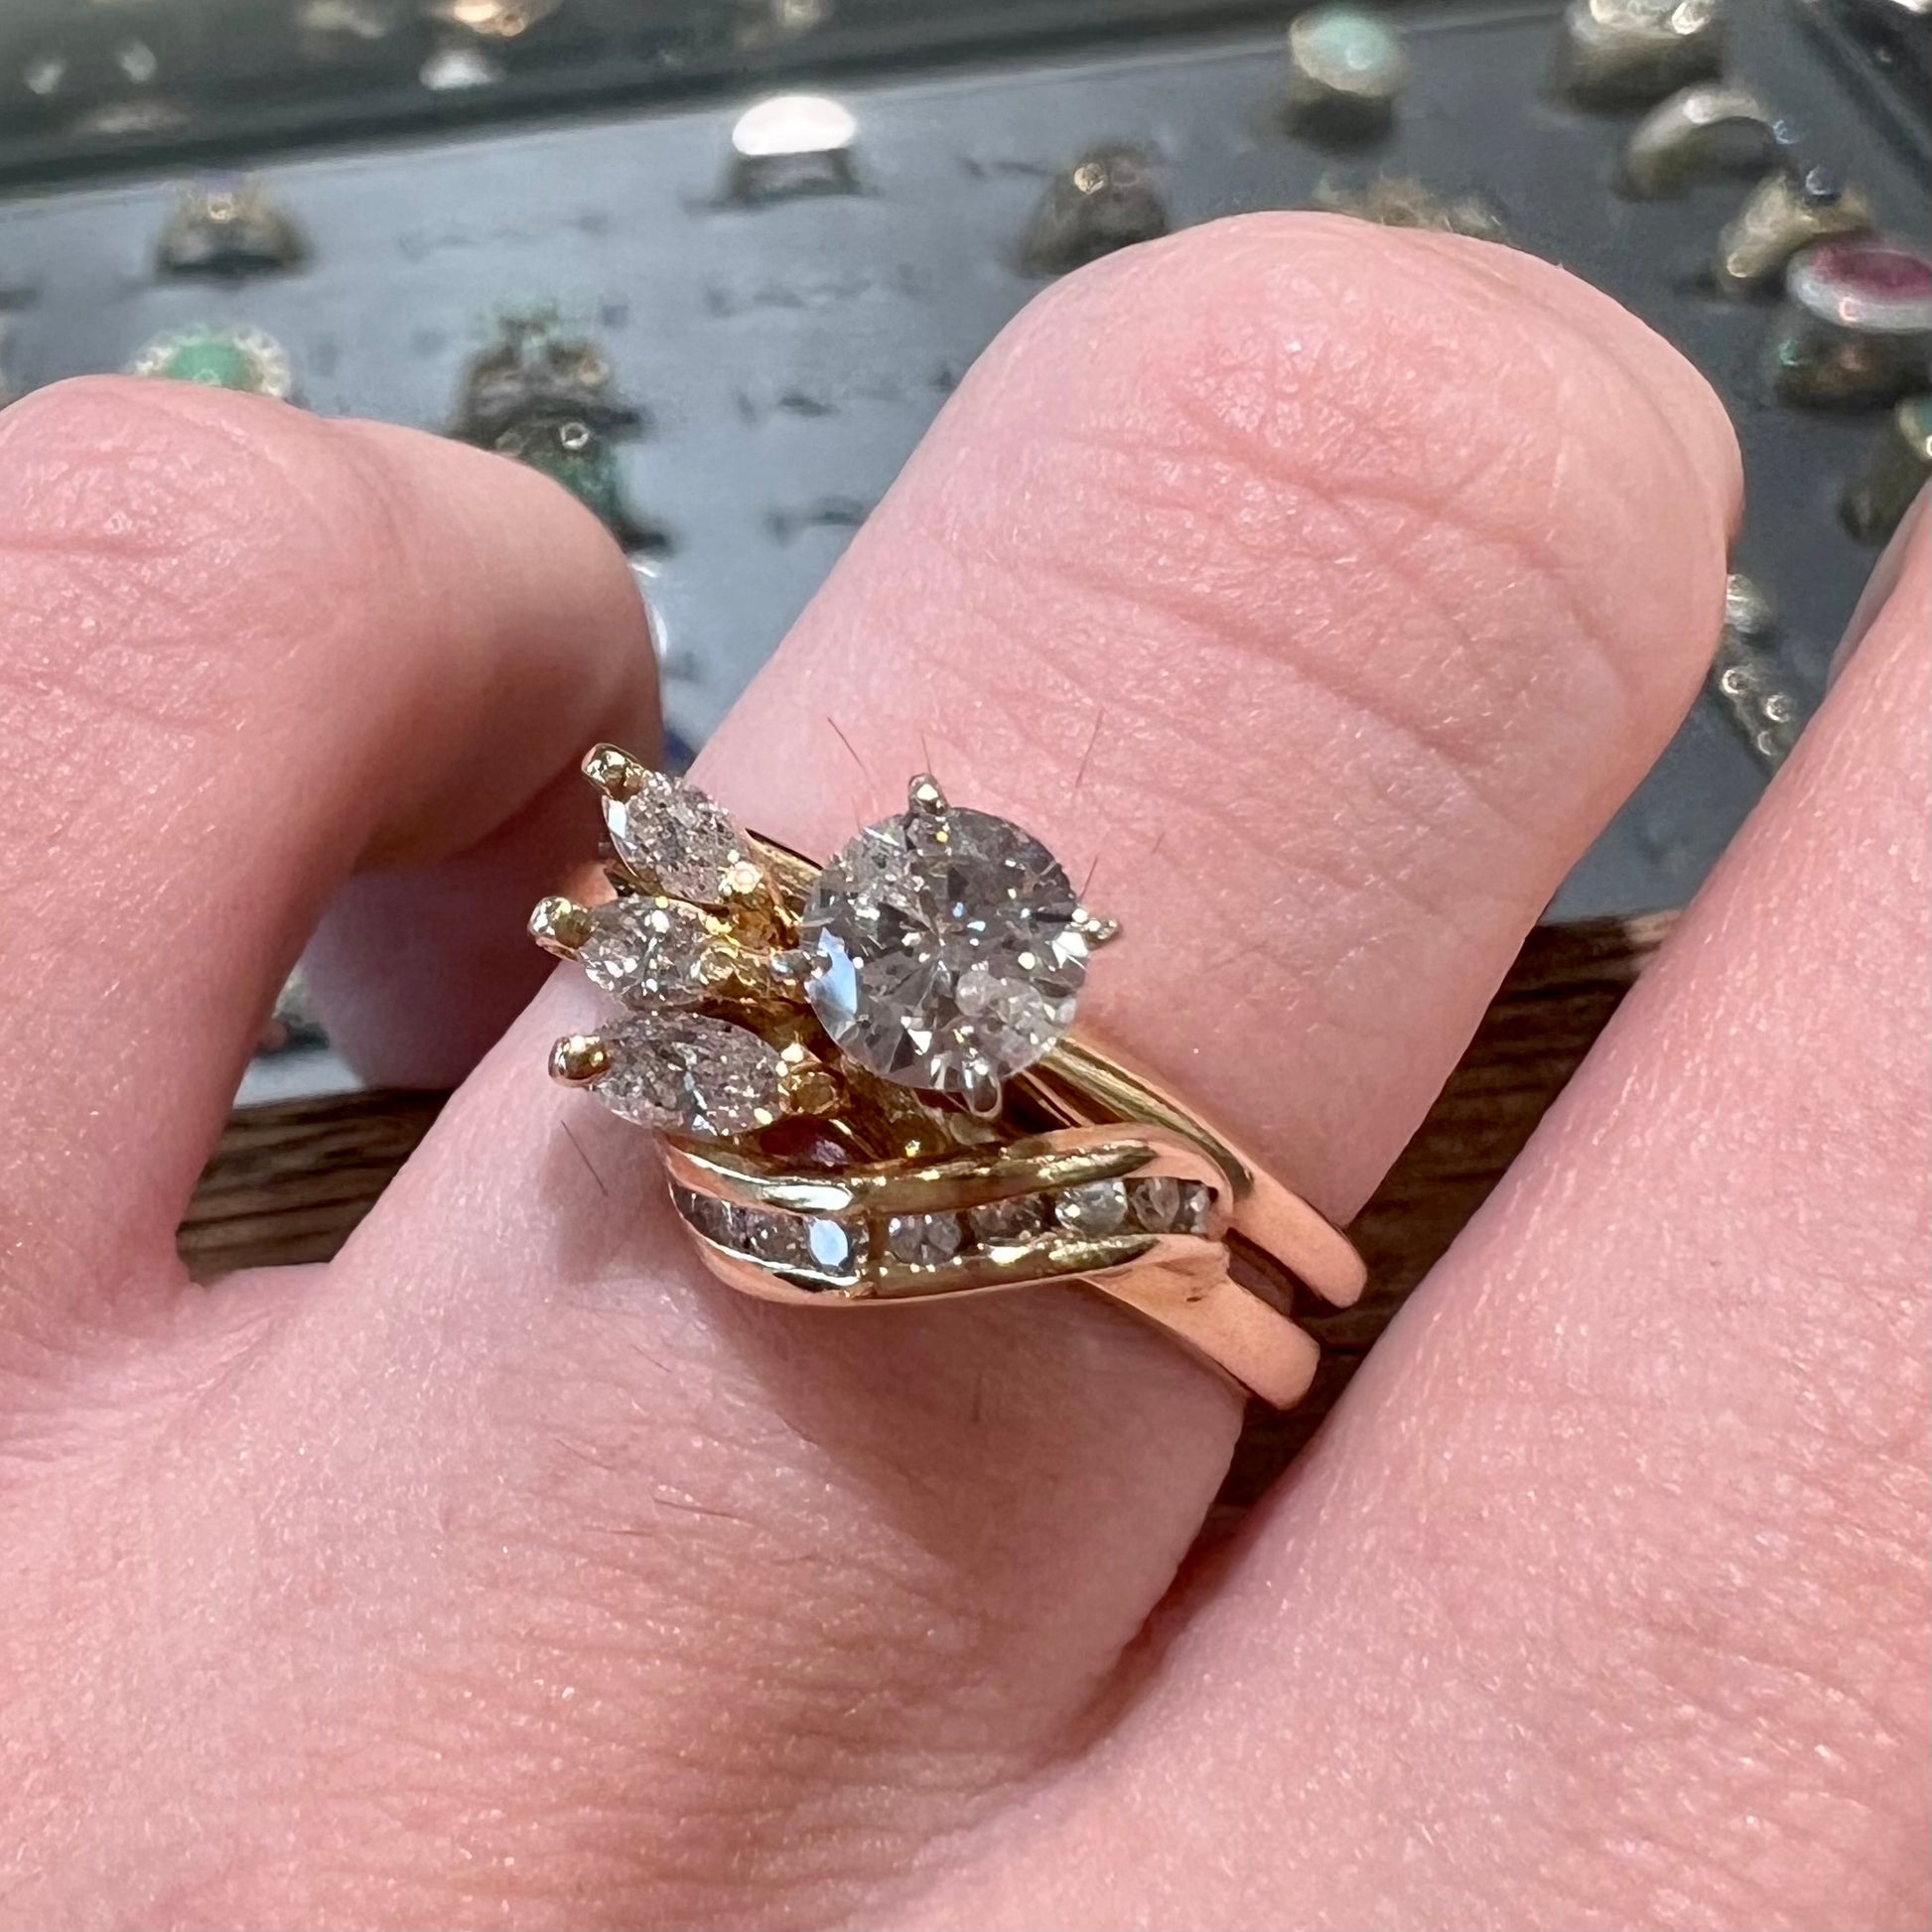 A vintage diamond wedding set with a round brilliant cut center stone and marquise cut accents in yellow gold.